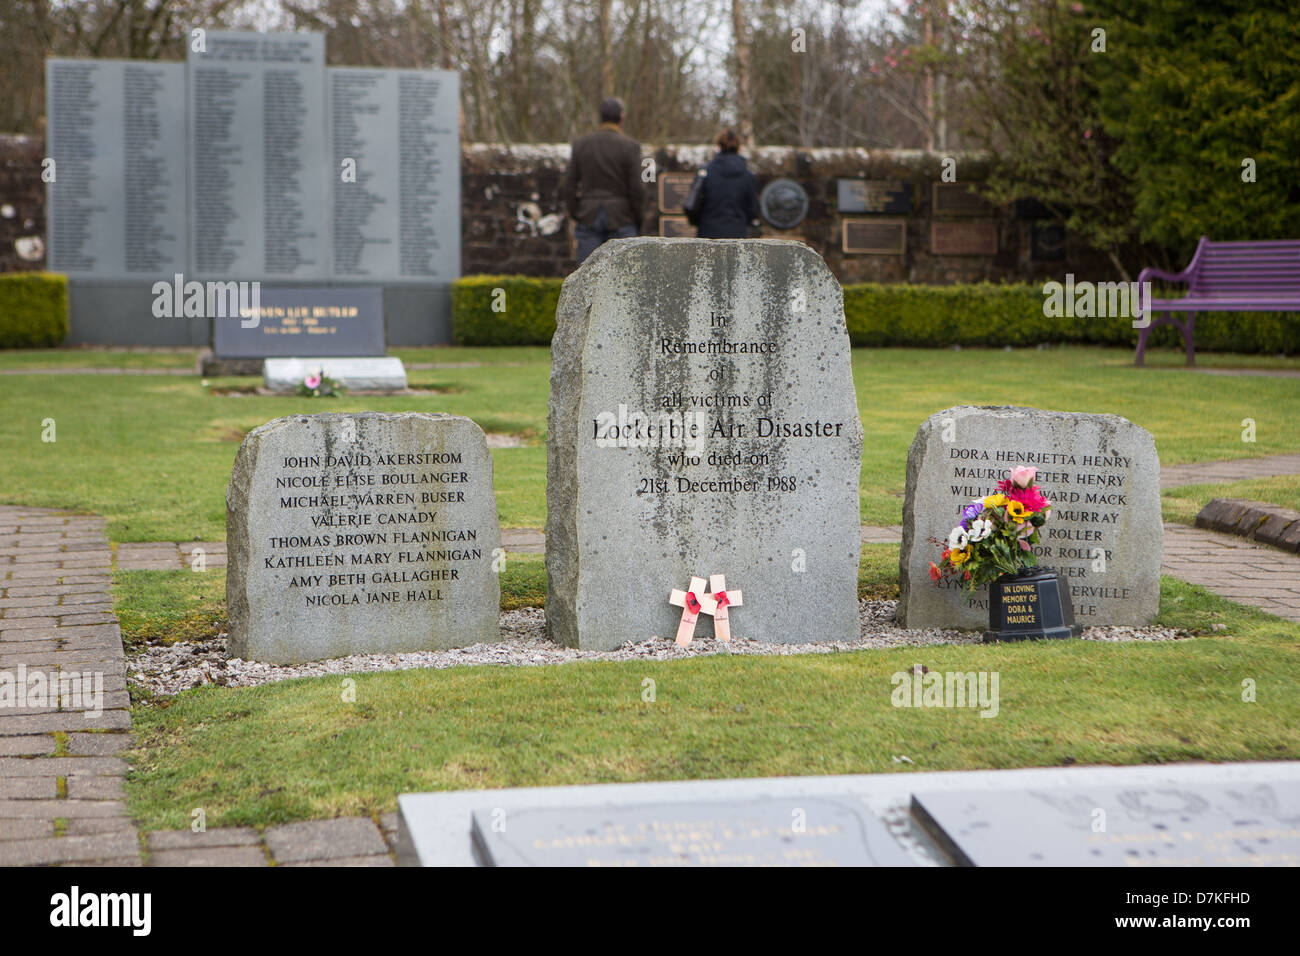 Memorial to the victims of the Lockerbie air crash. Stock Photo